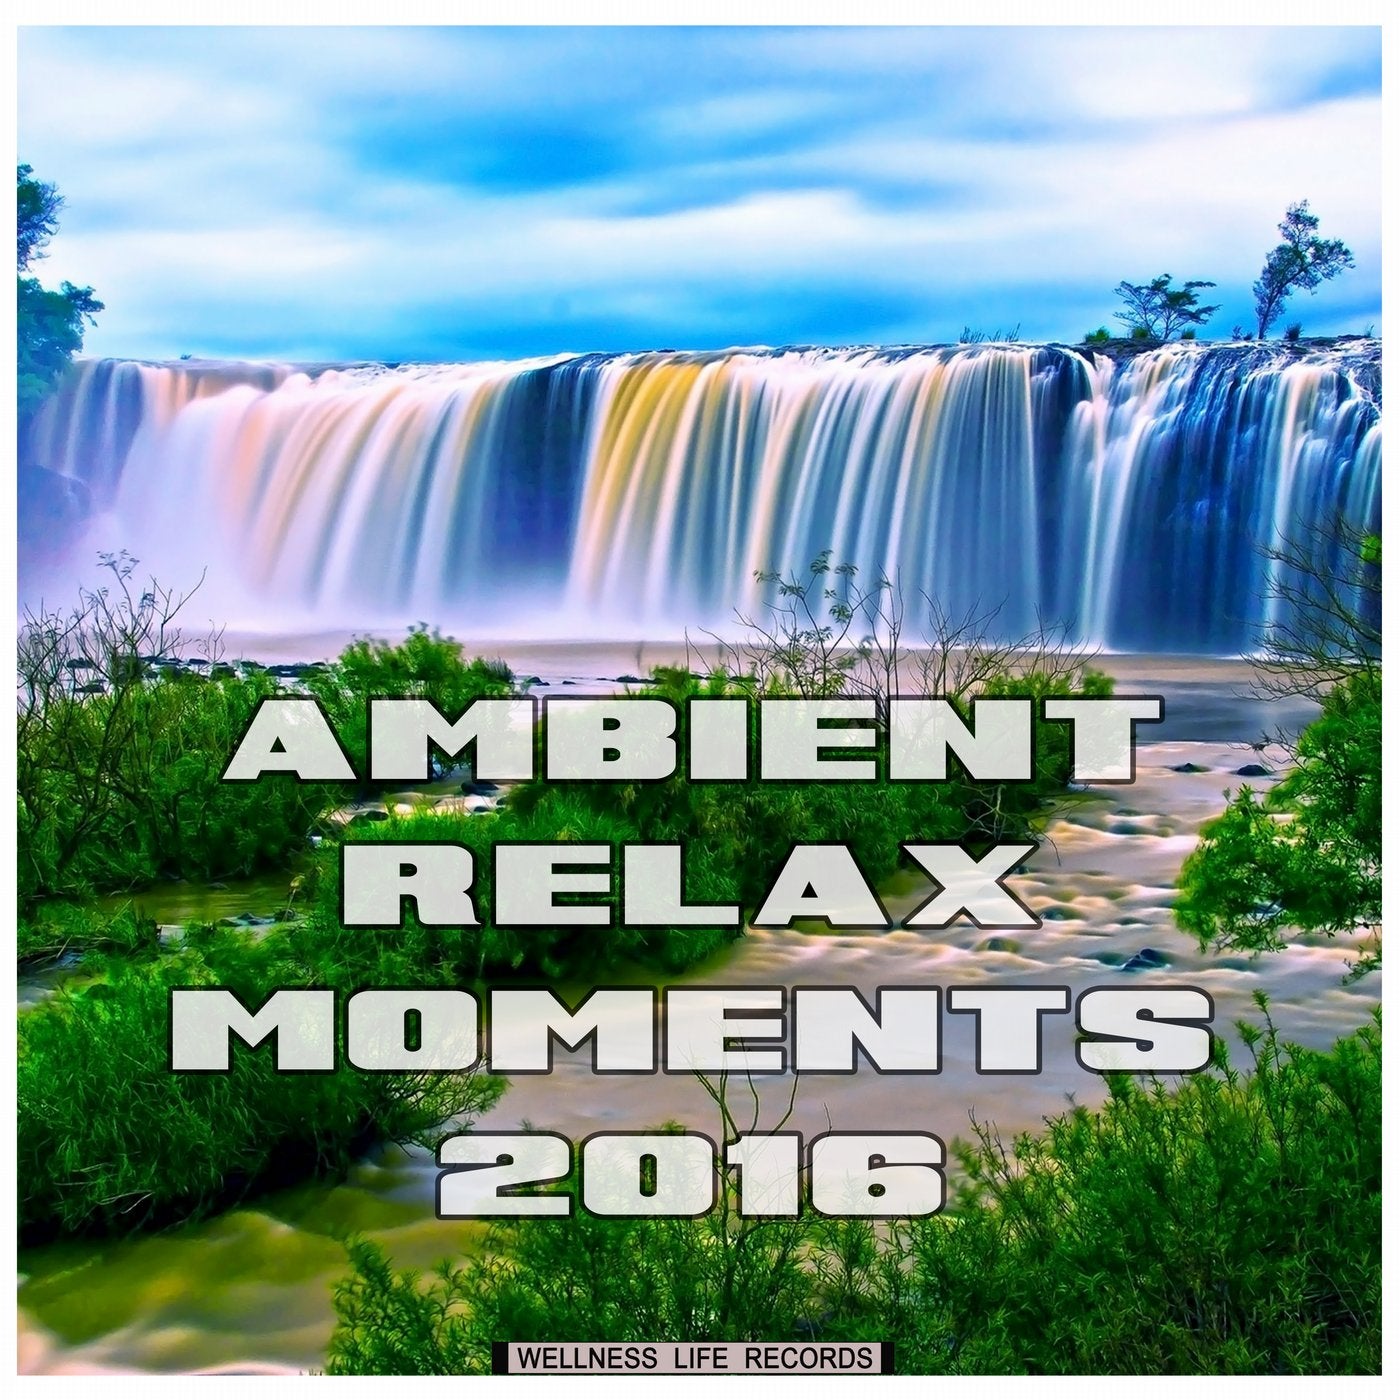 Ambient Relax Moments 2016